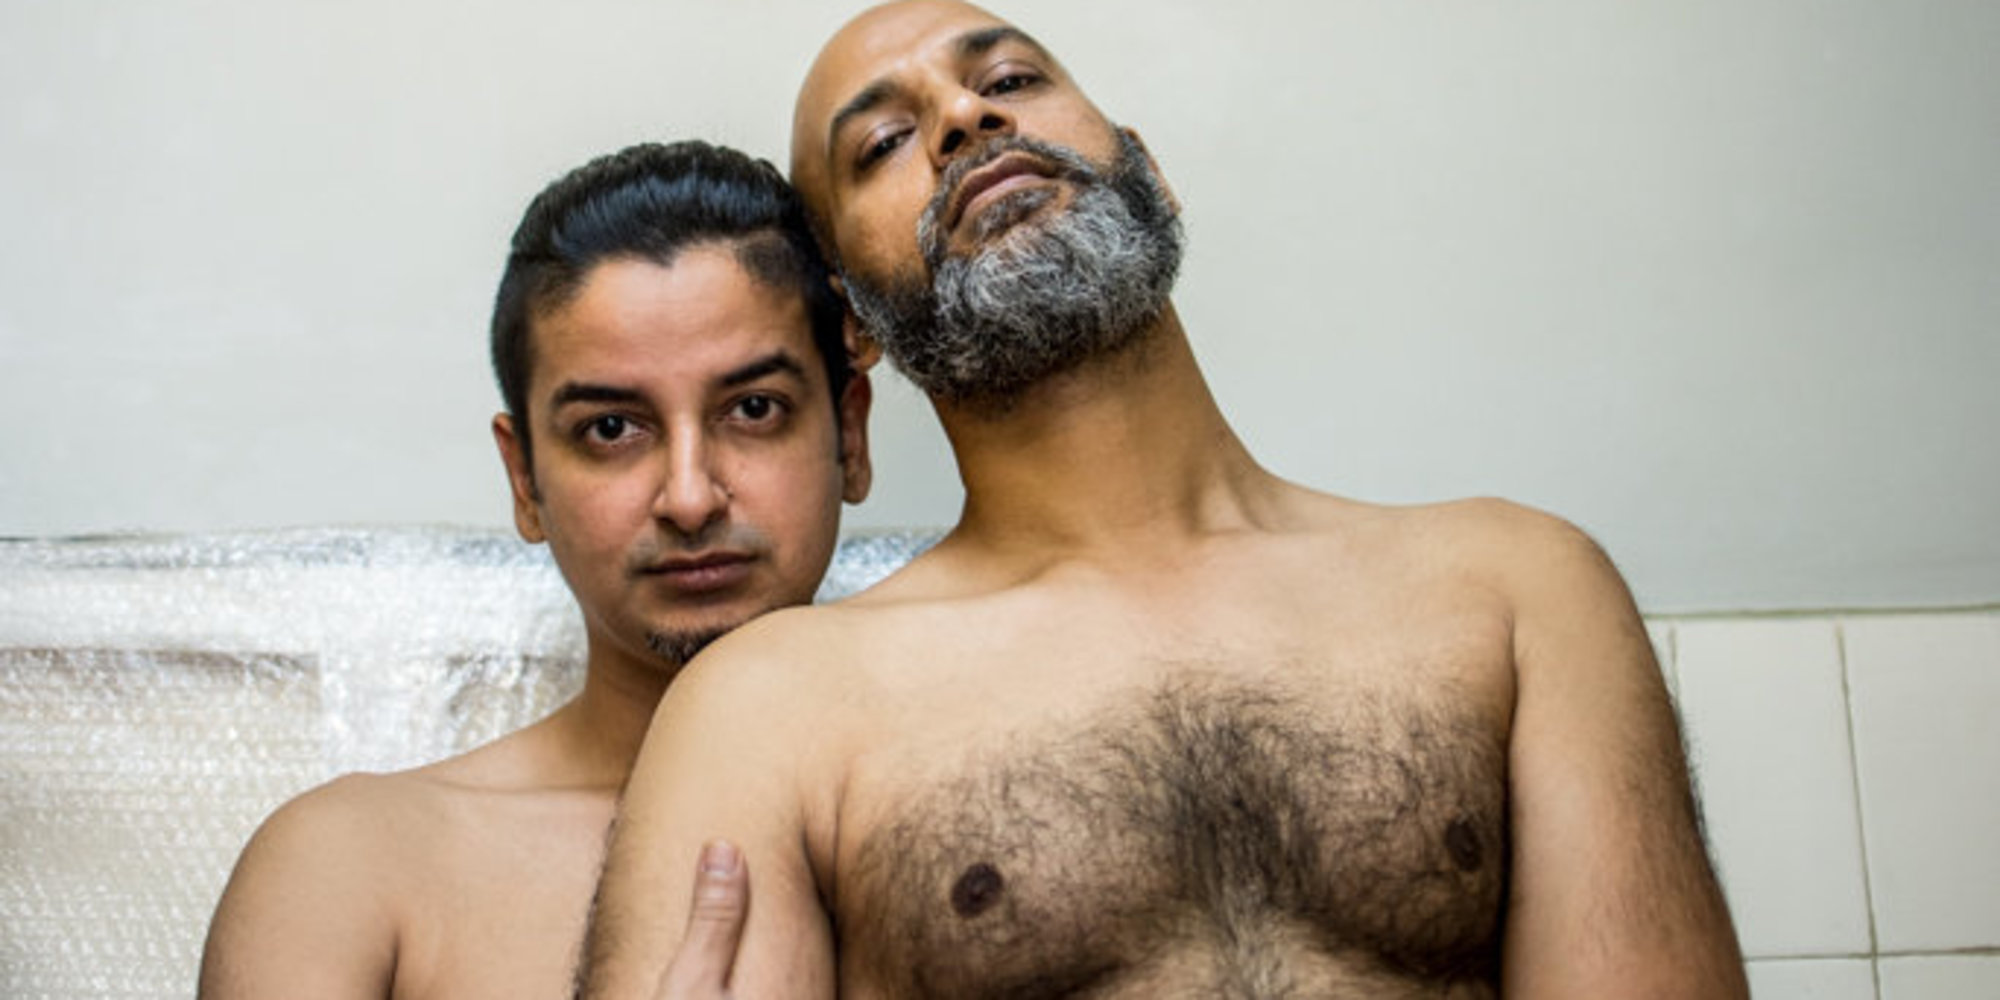 Gay Indian Men Strip Down For Queer Magazine Pictorial | Indian man